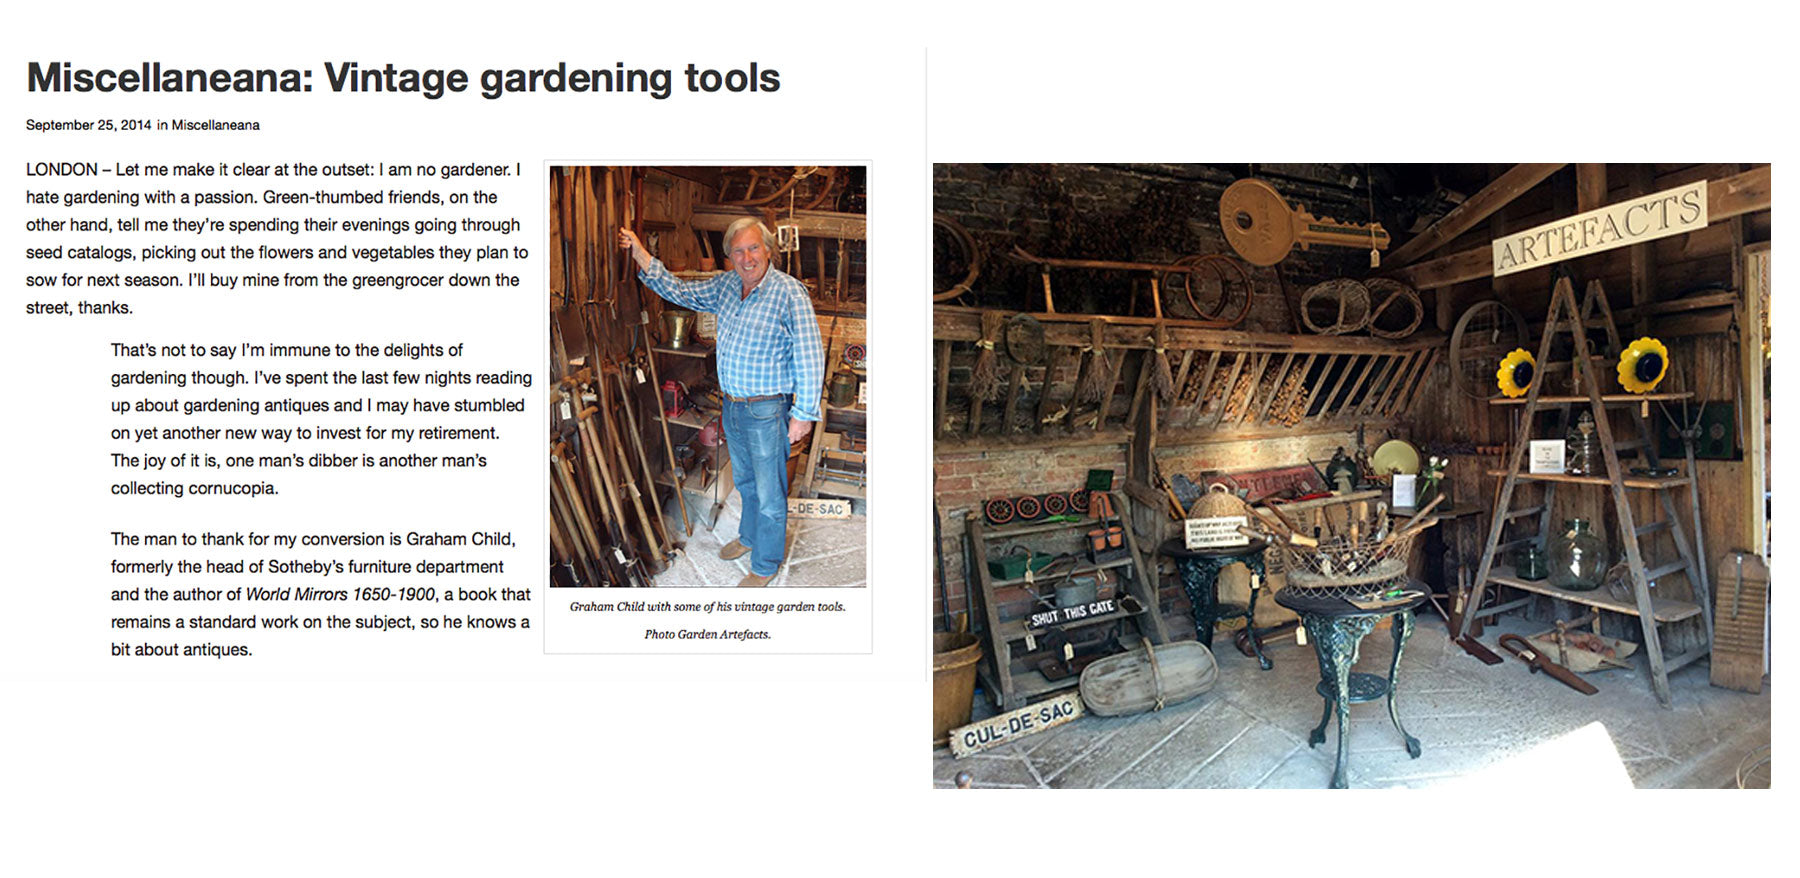 Auction Central News - Miscellaneana Vintage Gardening Tools